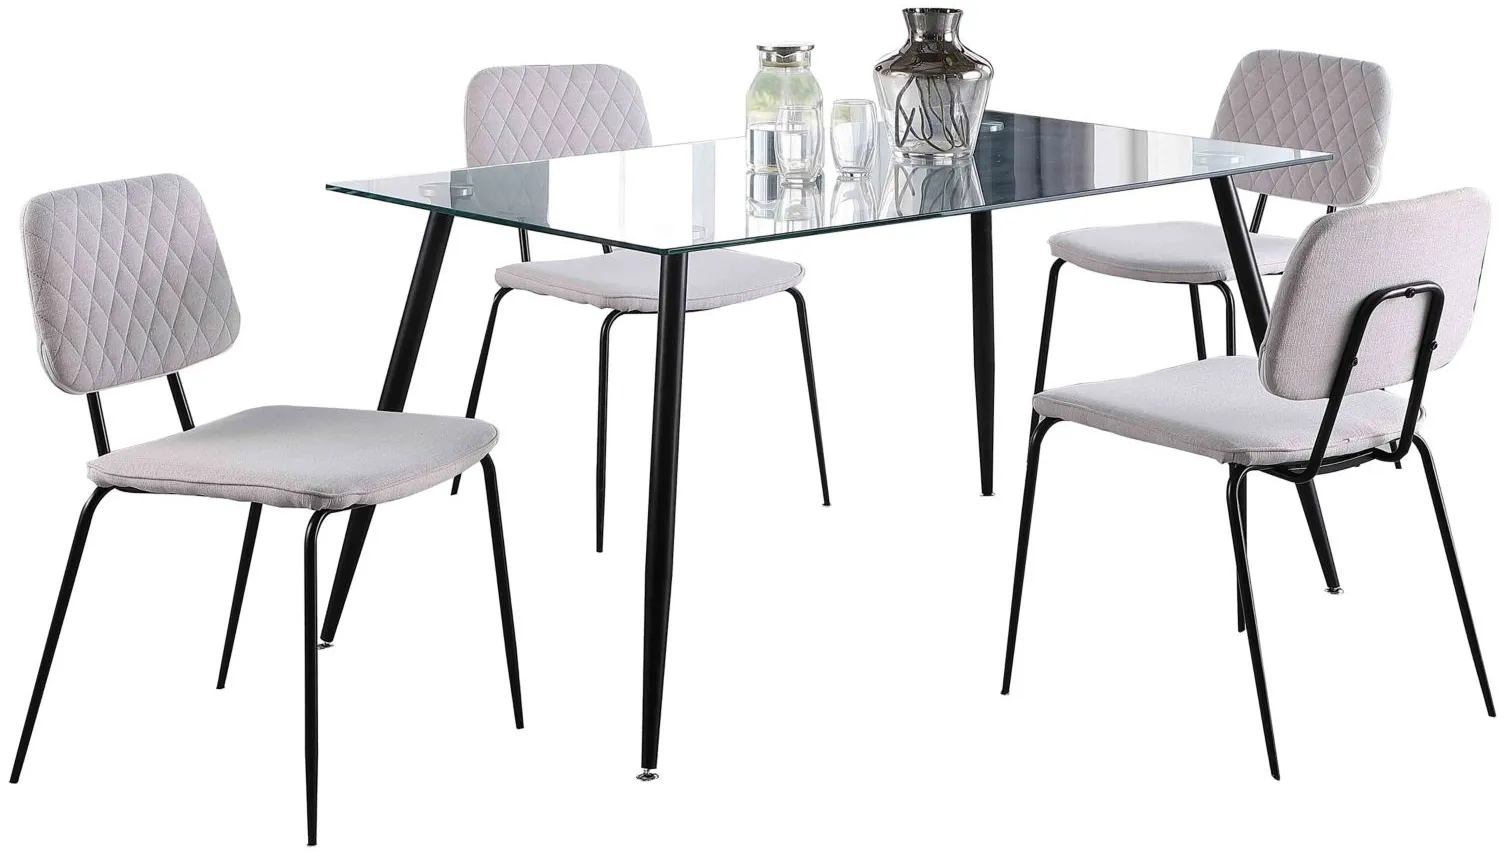 Bertha 5-pc. Dining Set in Gray by Chintaly Imports